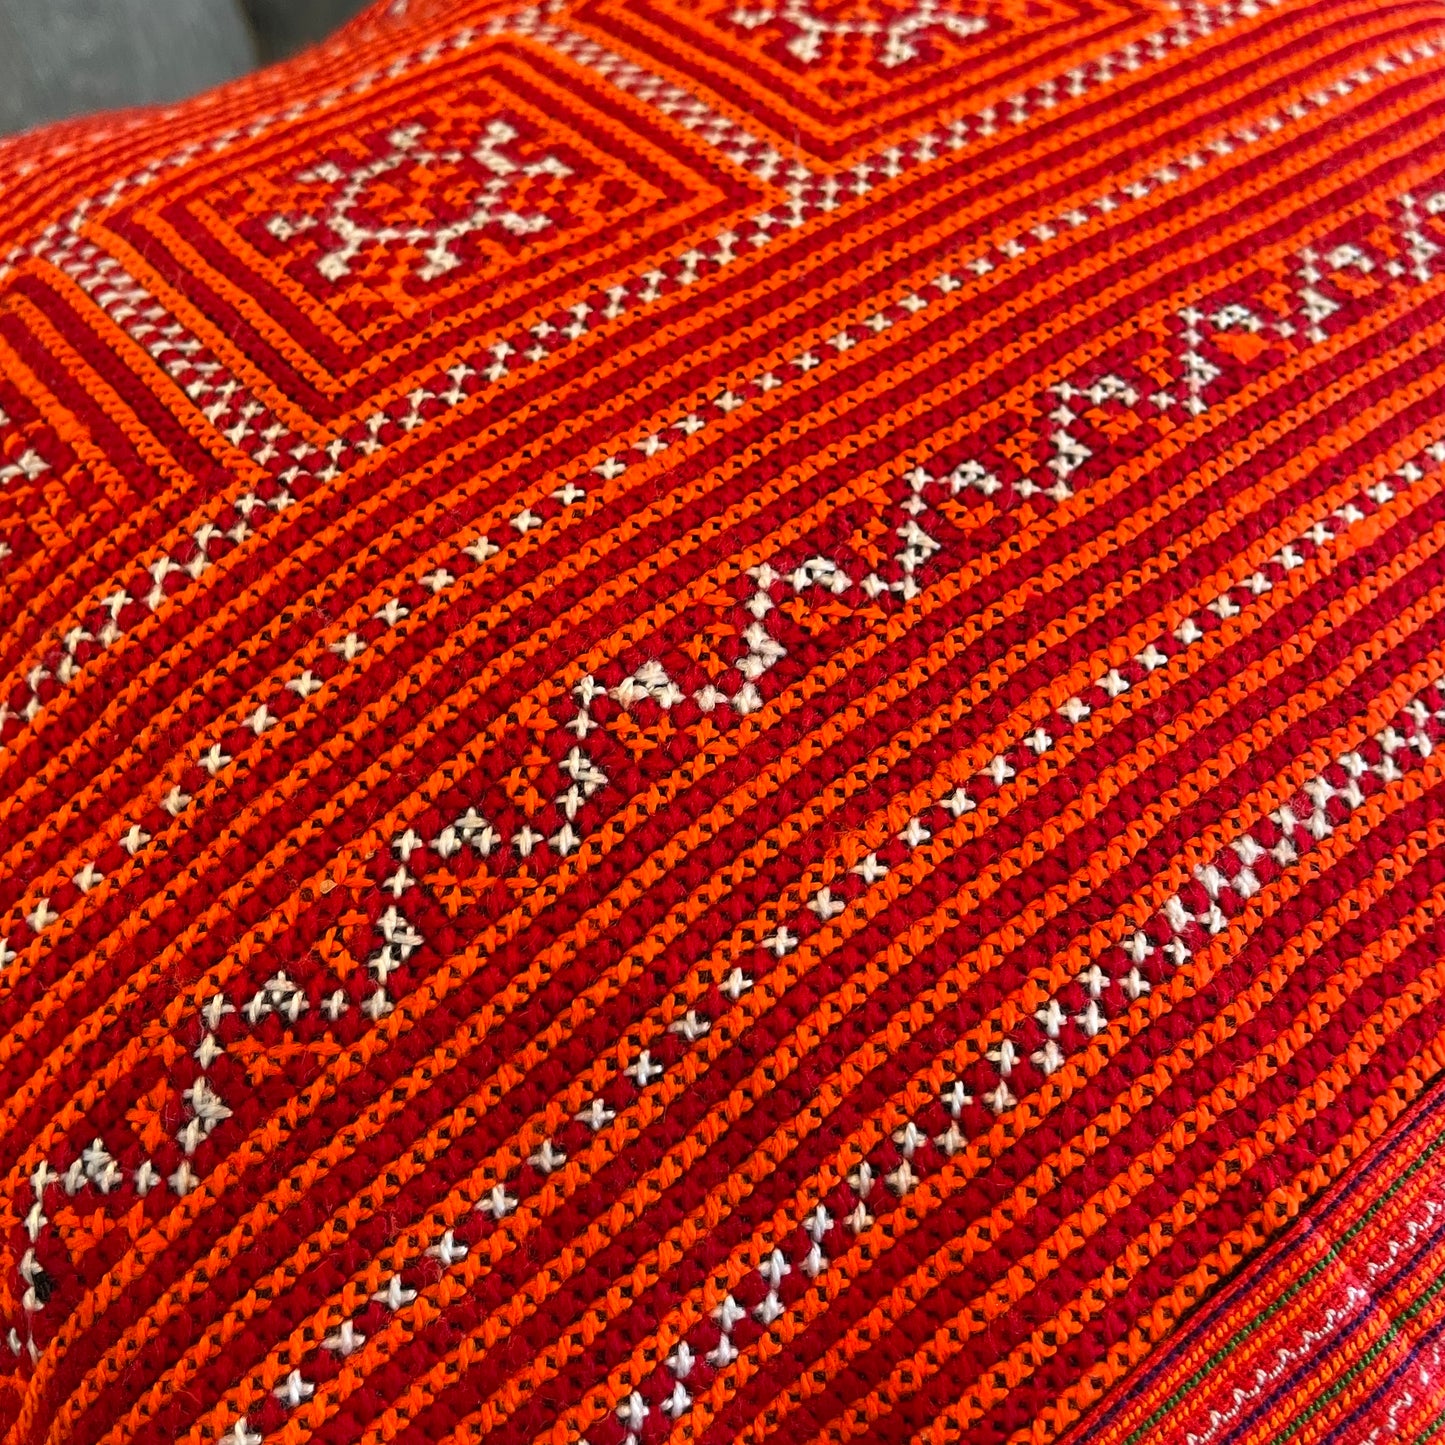 Cross-stitched embroidery cushion cover, handmade fabric, authentic tribal fabric